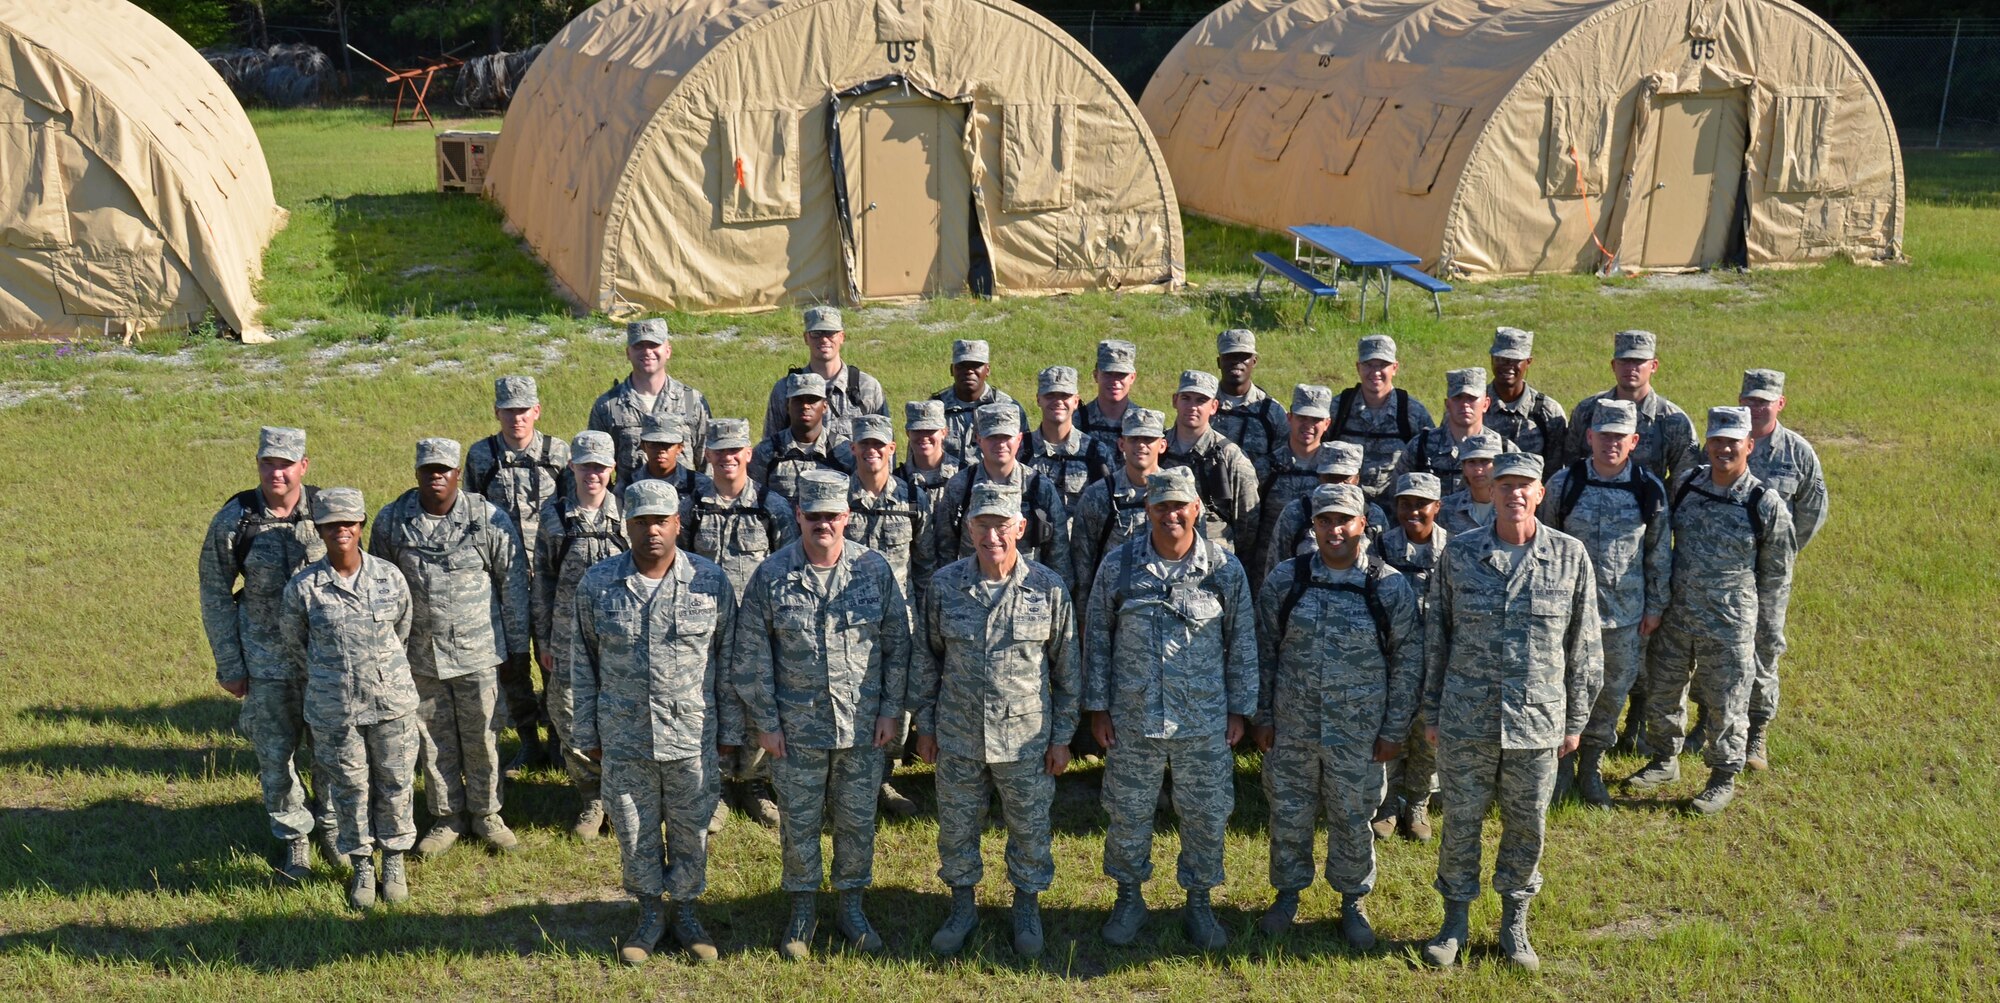 Chaplain candidates and cadre take a moment to pose for a photo at Robins Air Force Base, Georgia, July 25. The candidates are participants in the Air Force Reserve Command Chaplain Candidate Intensive Interview program which aims to provide an extensive overview of the Air Force Reserve mission and military chaplain corps.(U.S. Air Force photo/Tech. Sgt. Kelly Goonan)